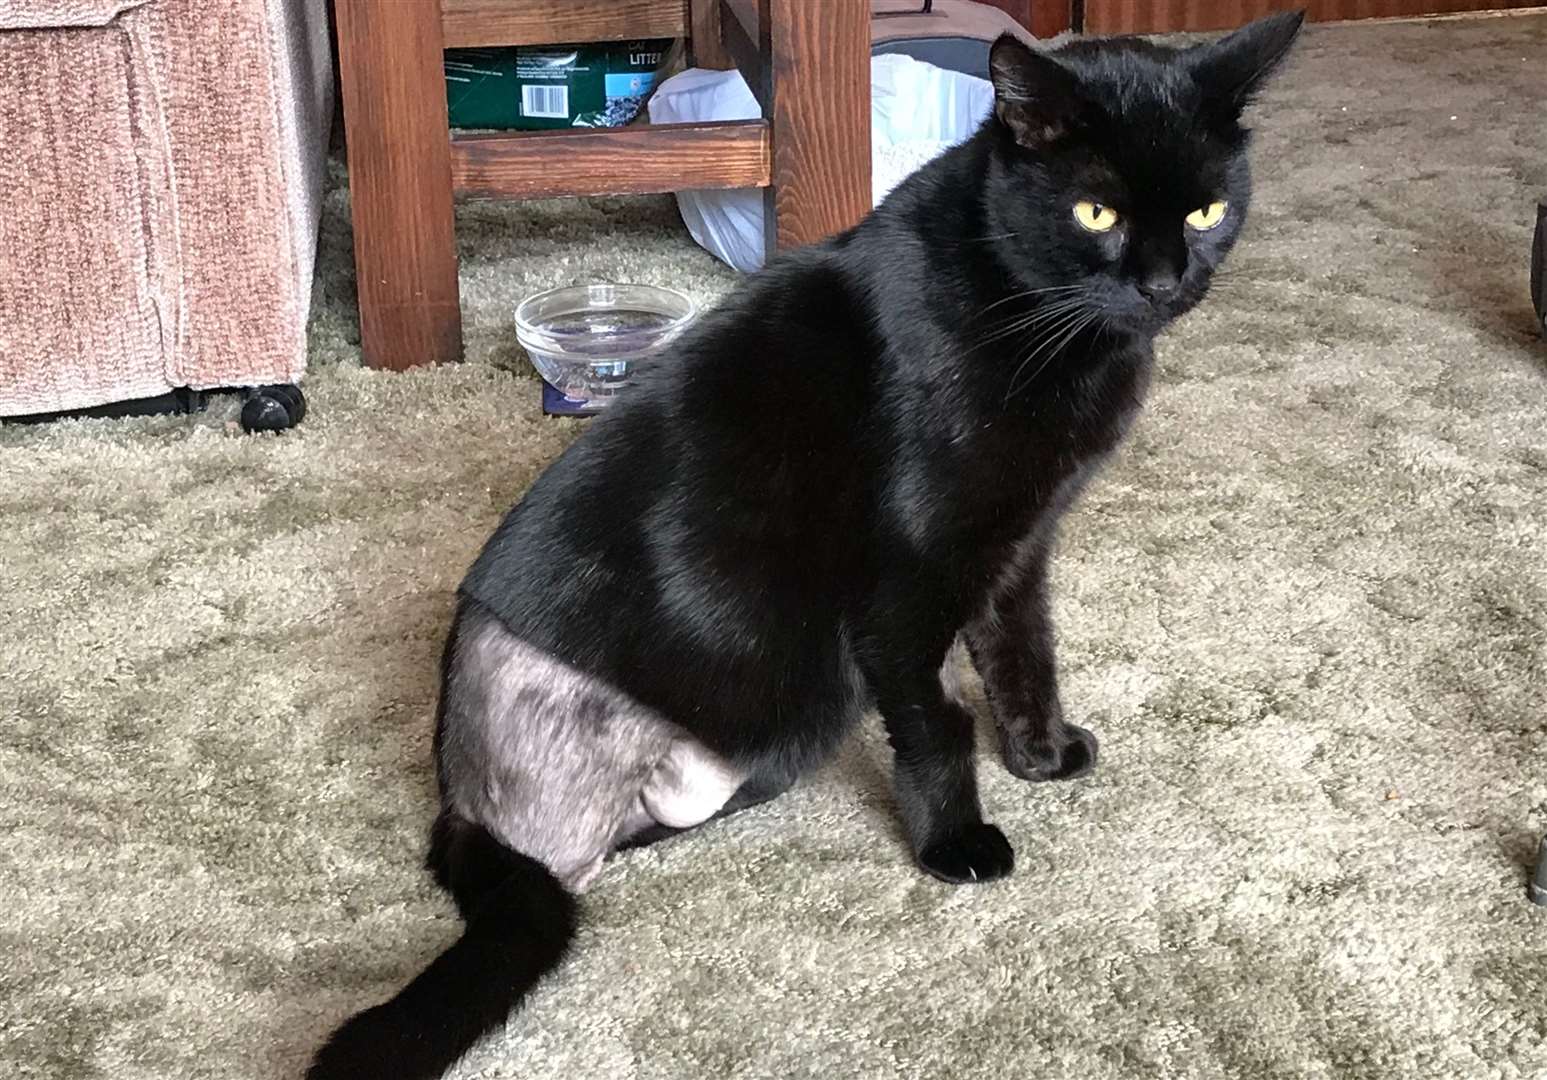 This cat had to have its leg amputated after being shot